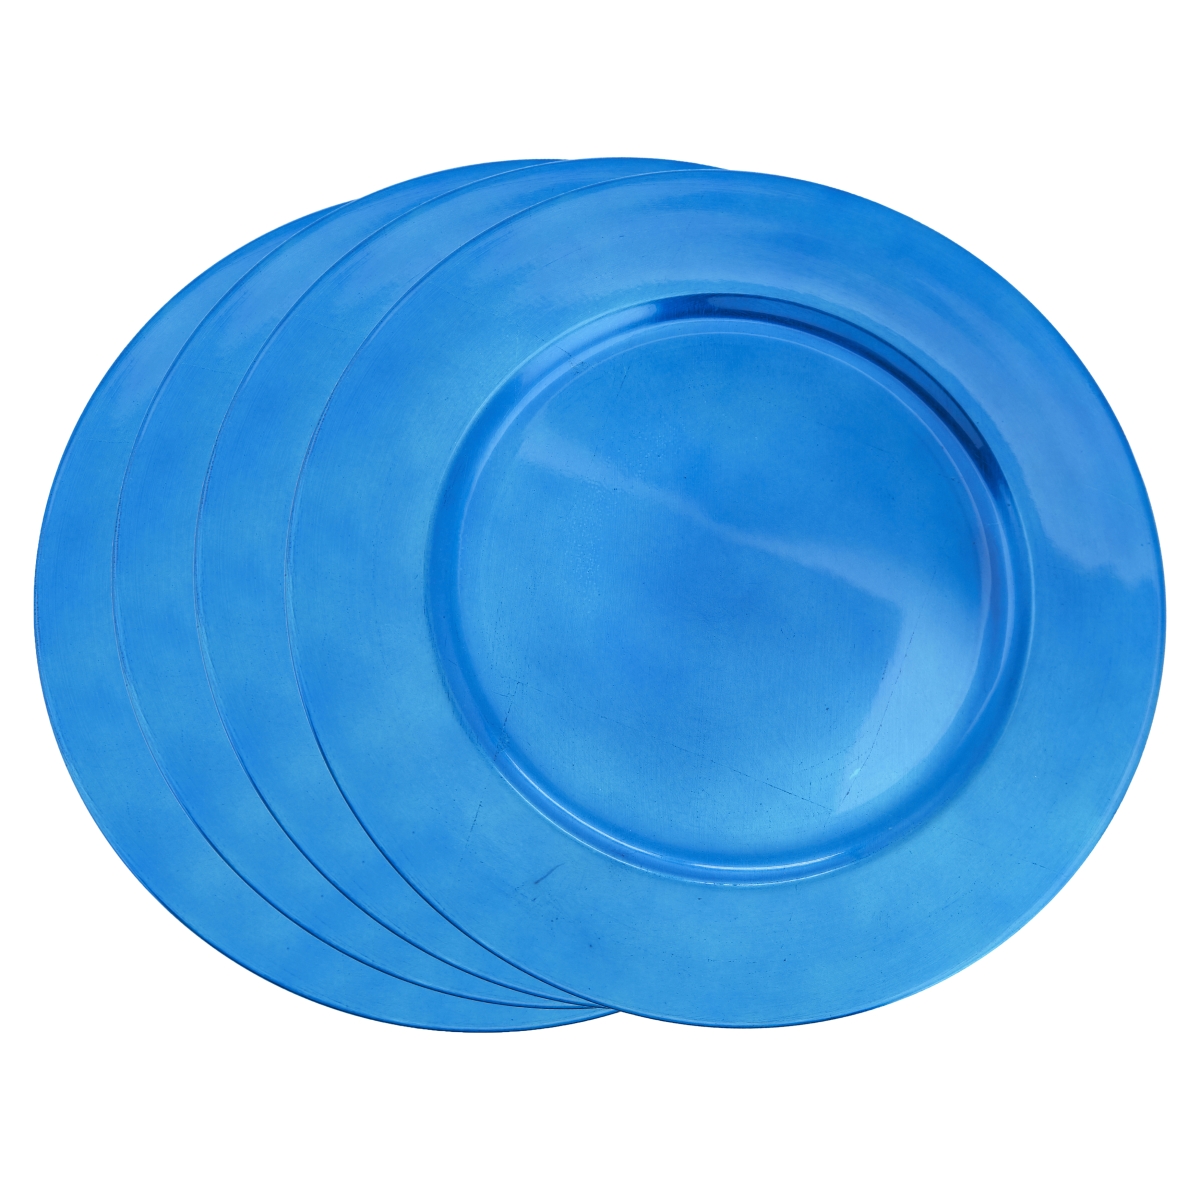 Ch001.cz13r 13 In. Round Classic Design Charger Plate - Cobalt Blue, Set Of 4